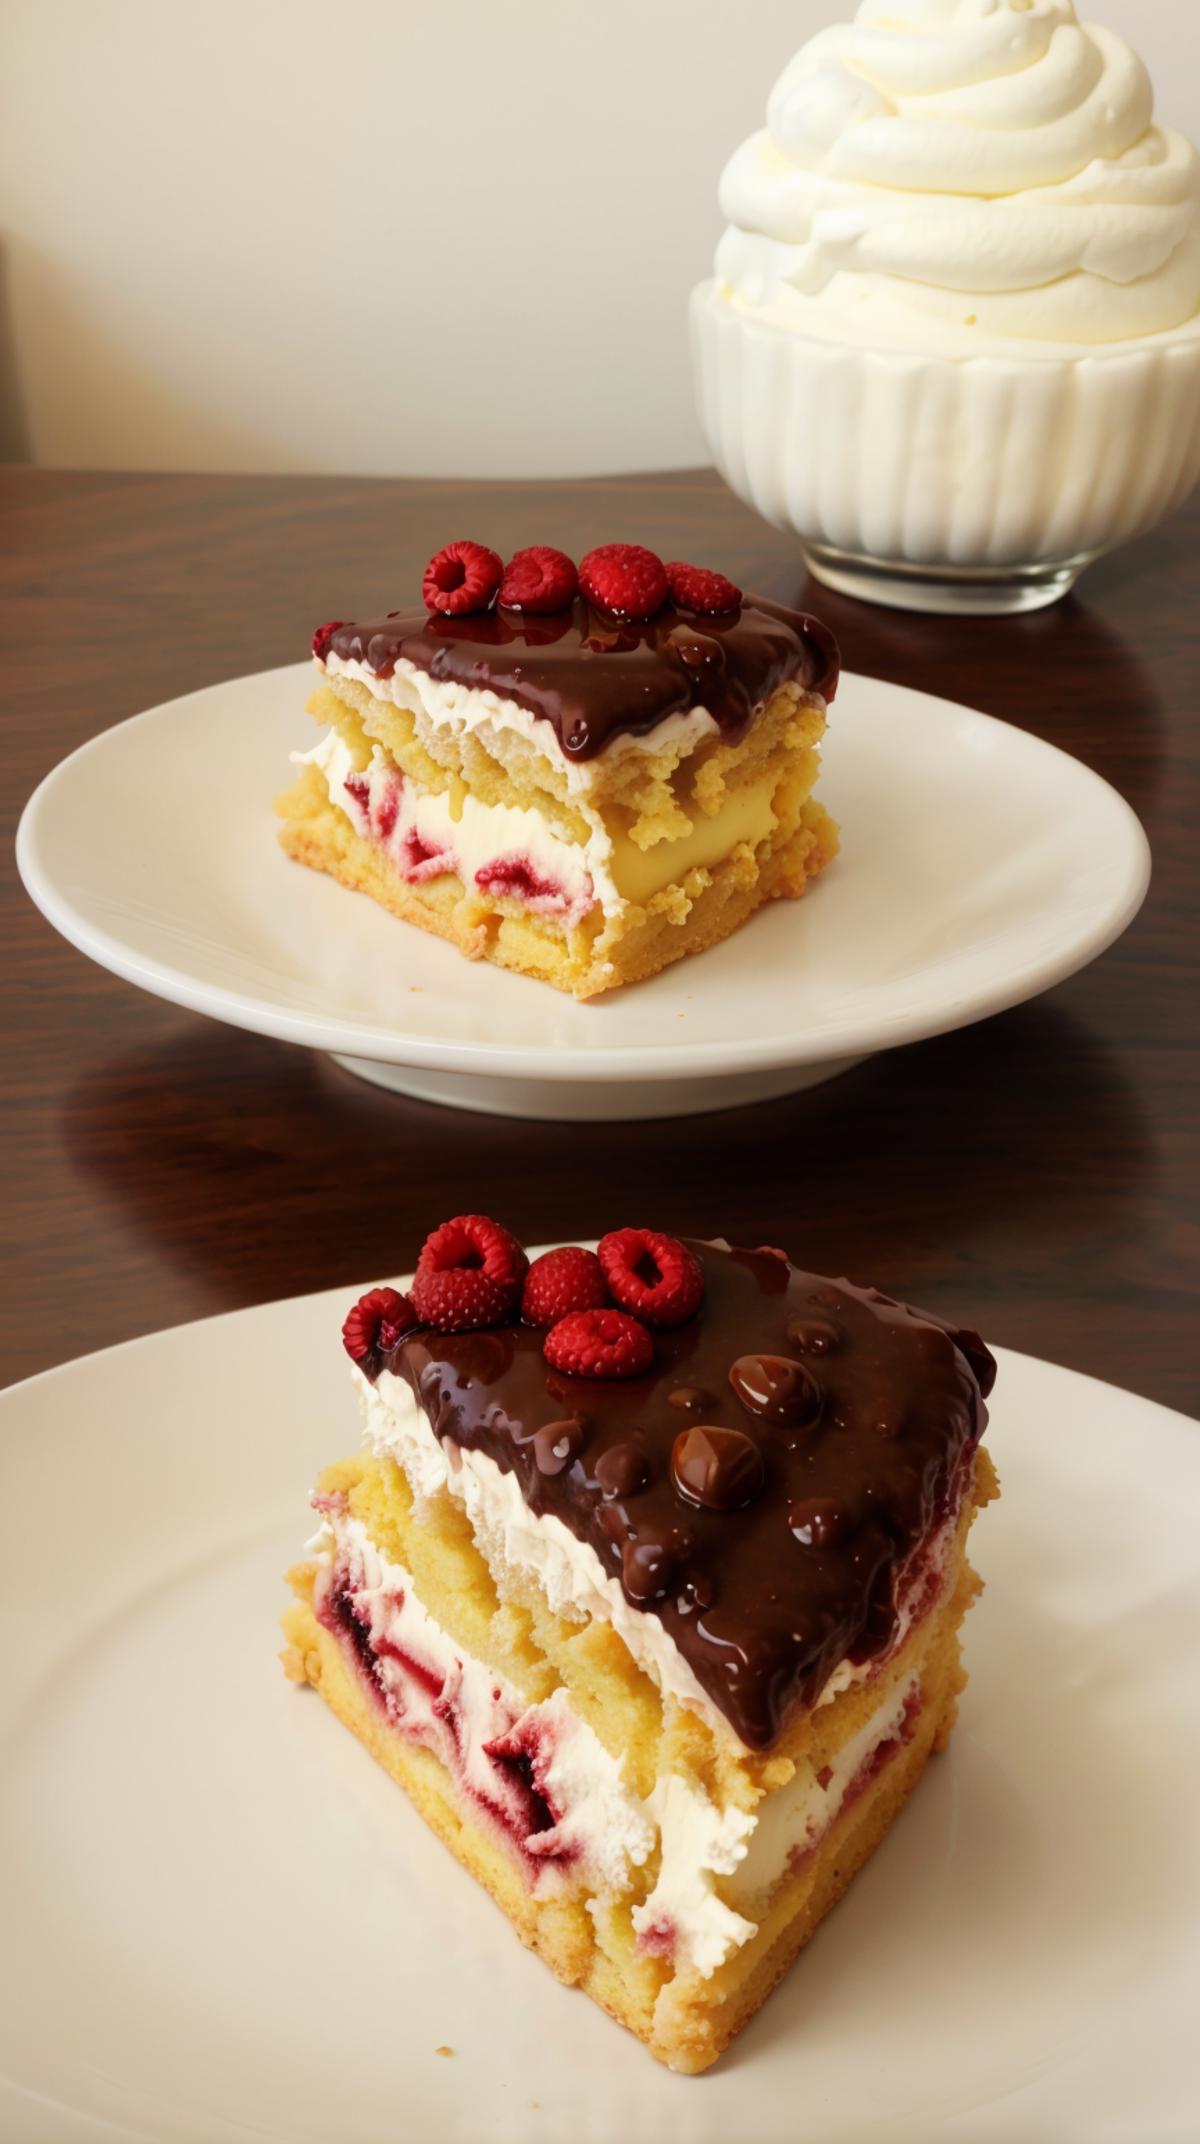 Swedish Desserts - Recipes in the model details! 🤤🤤🤤 image by mnemic